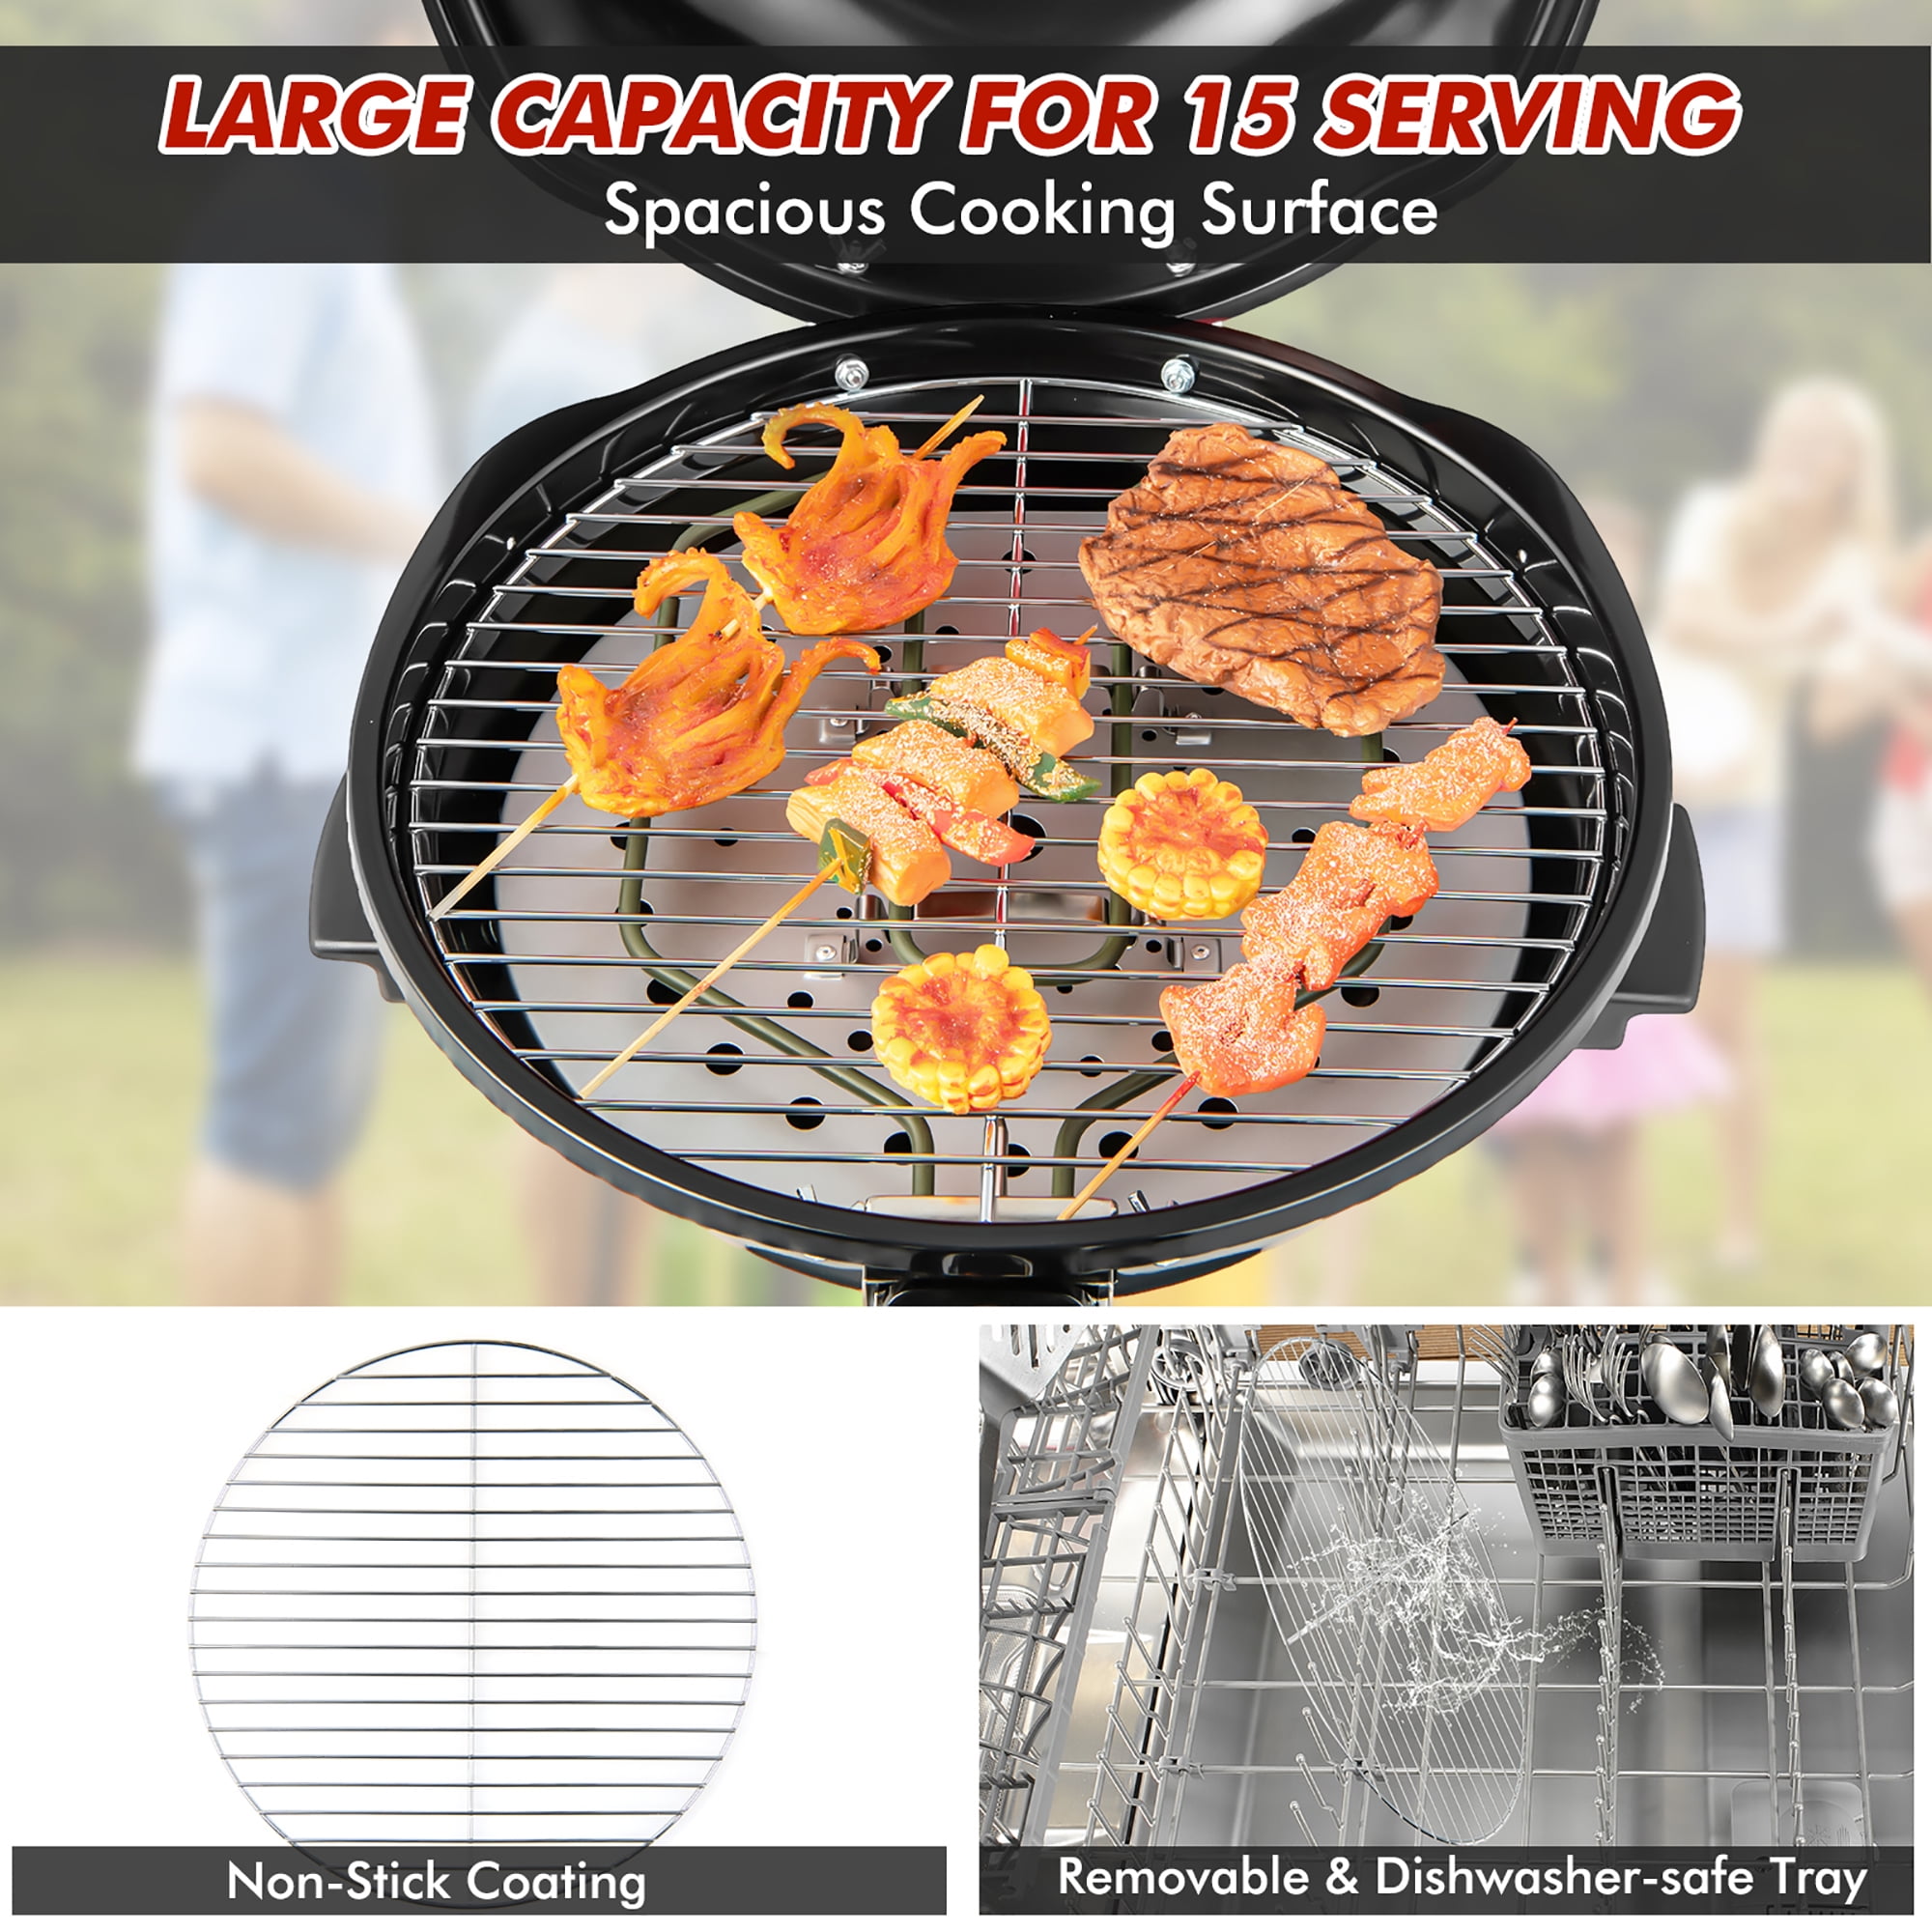 Barton 1600W Infrared Smokeless Electric Indoor Grill BBQ Grilling